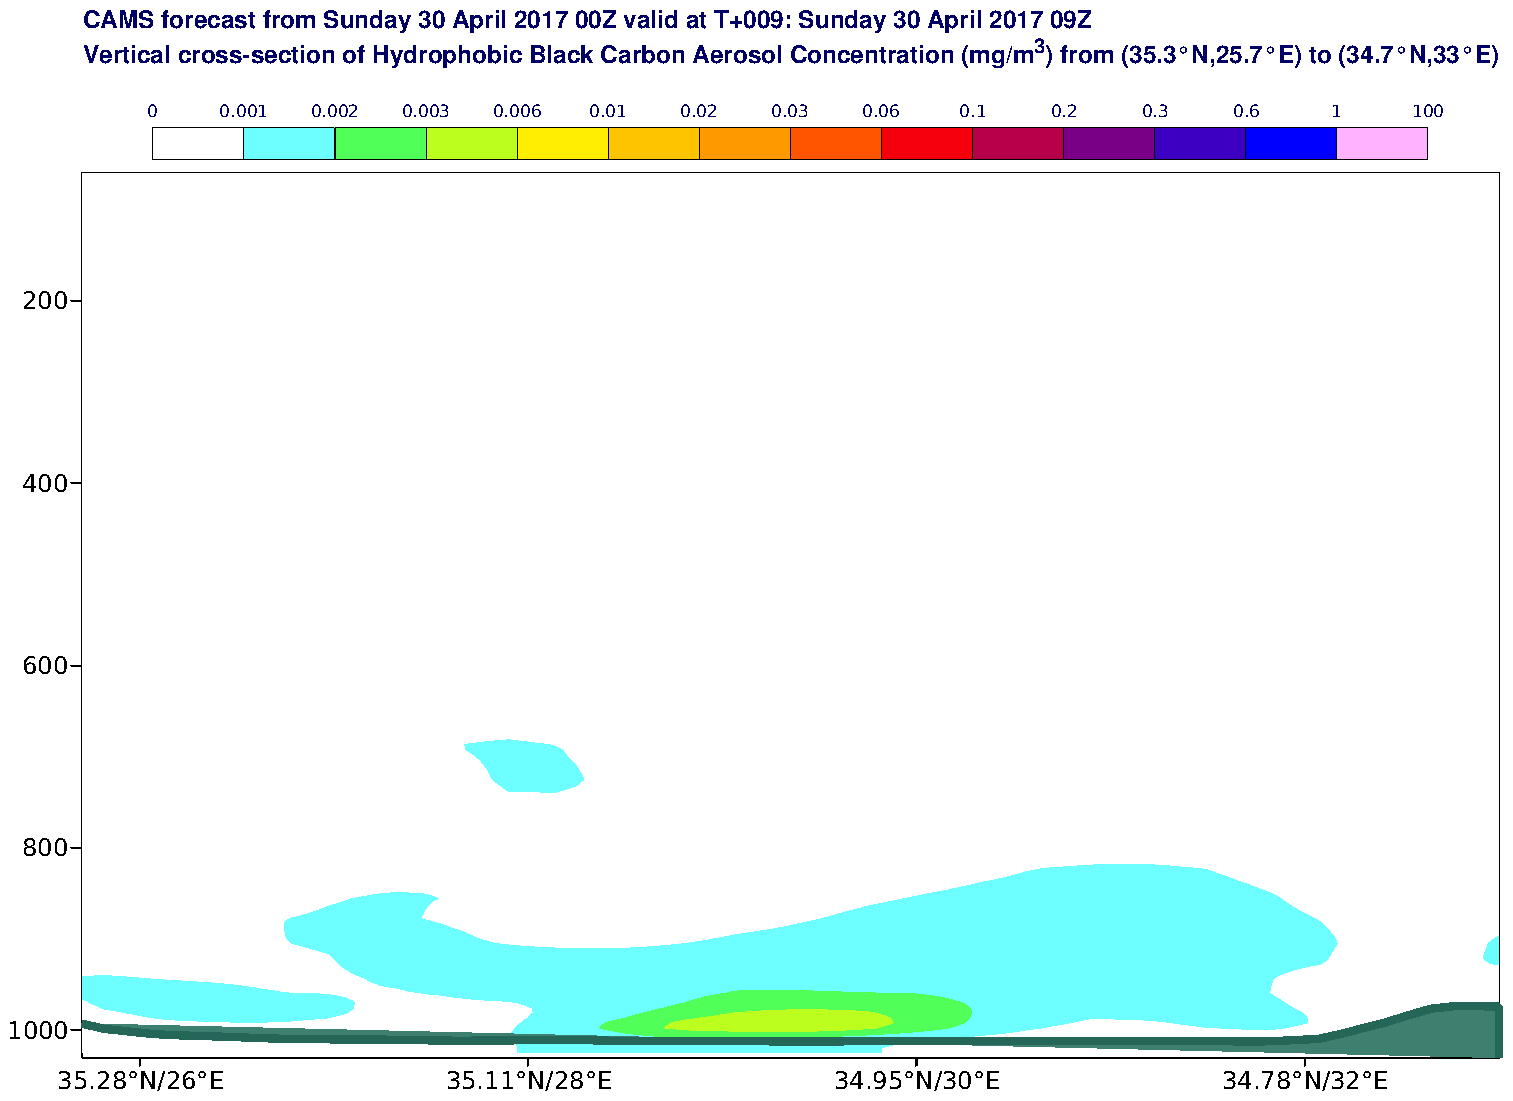 Vertical cross-section of Hydrophobic Black Carbon Aerosol Concentration (mg/m3) valid at T9 - 2017-04-30 09:00